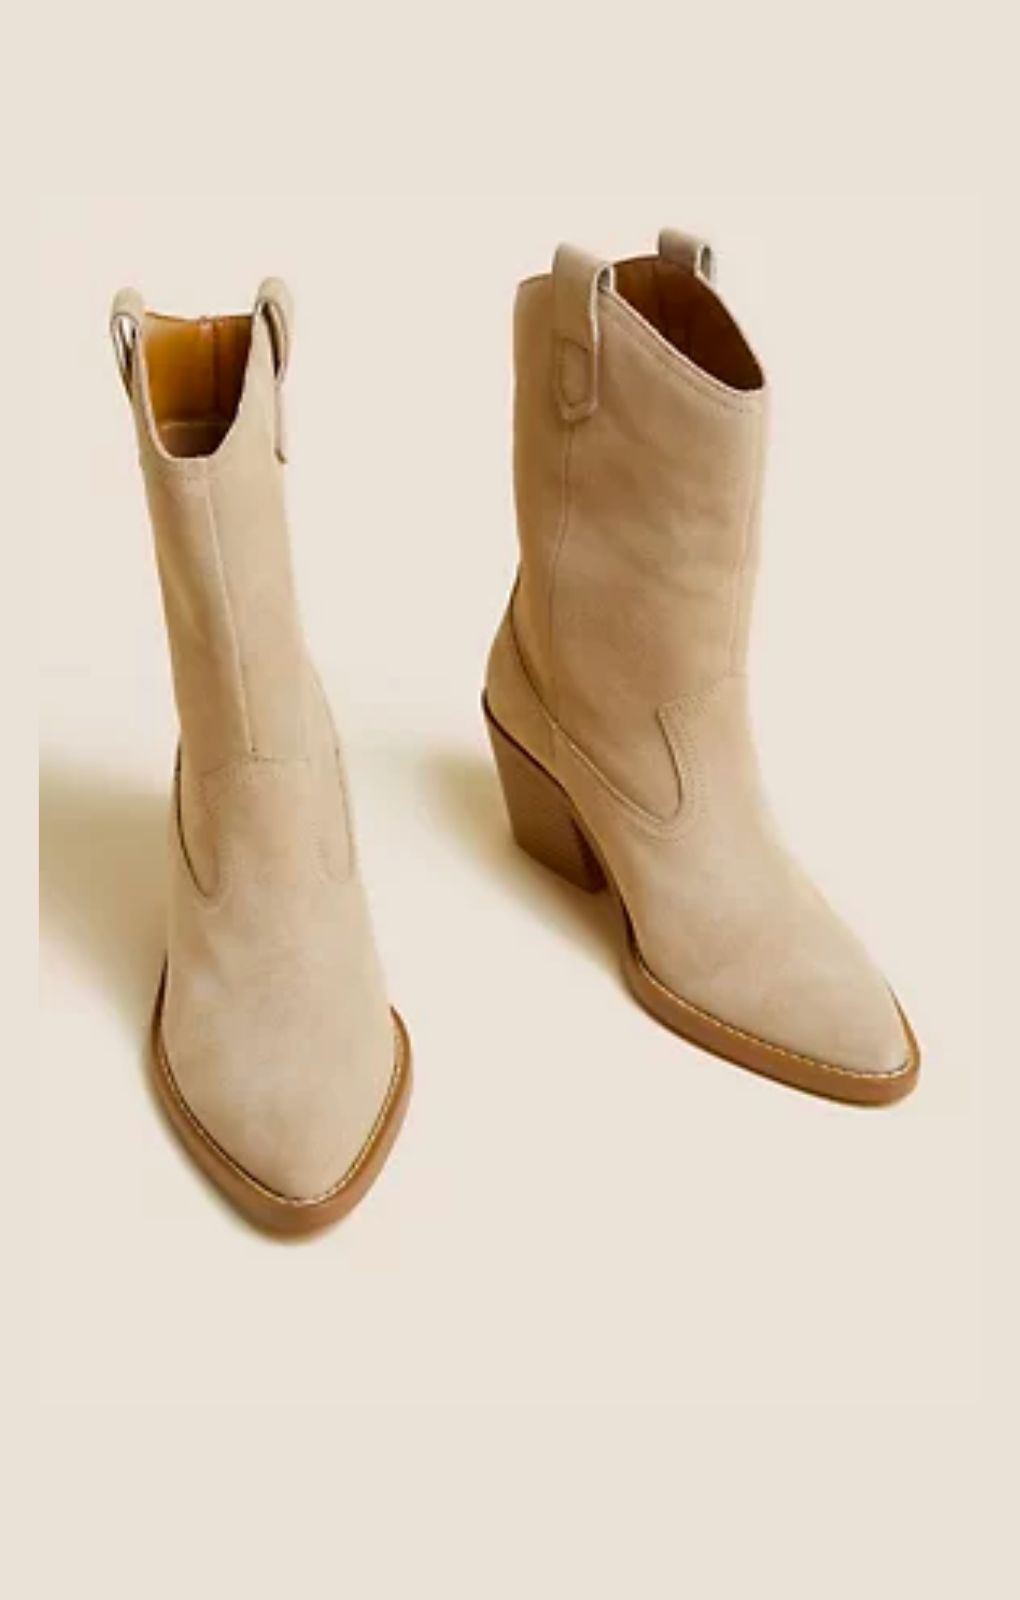 M&S Suede Western Block Heel Ankle Boots product image